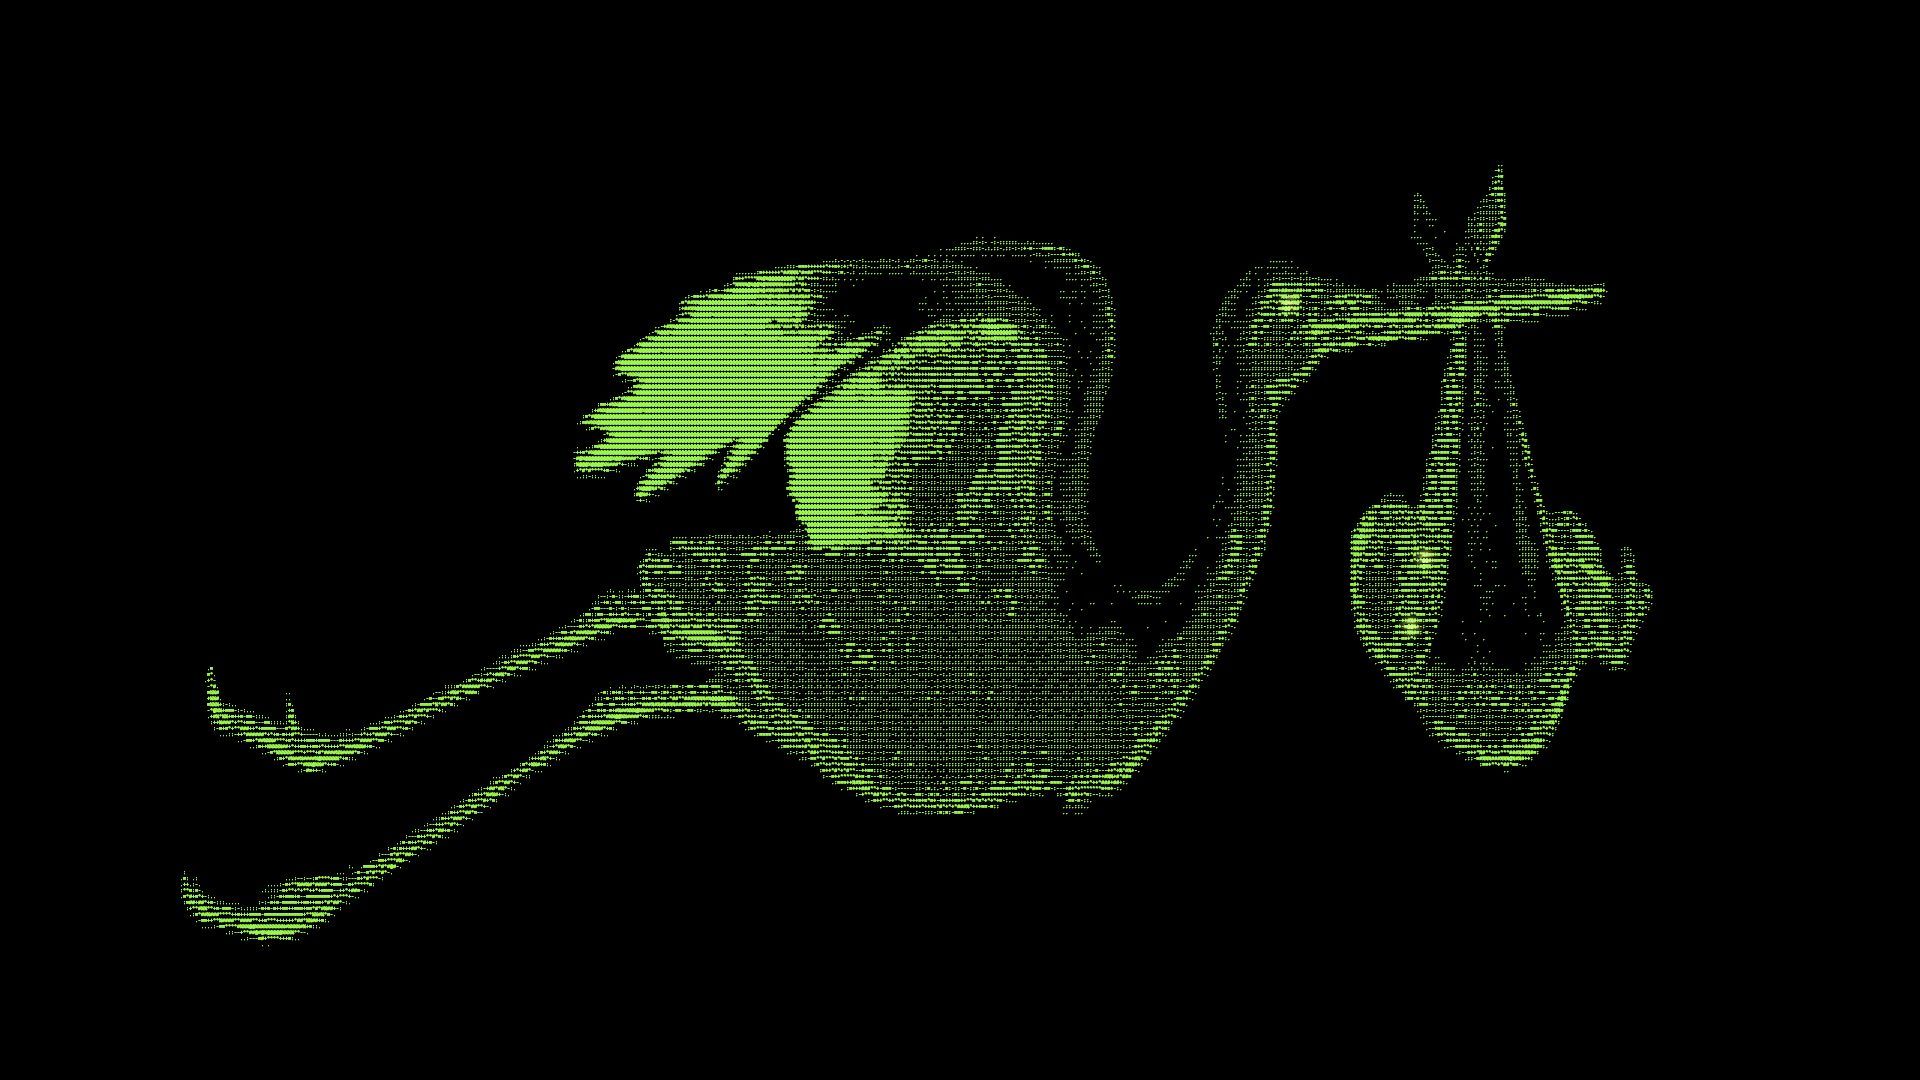 Illustration of a digitized green image of a stork carrying a baby in a sheet